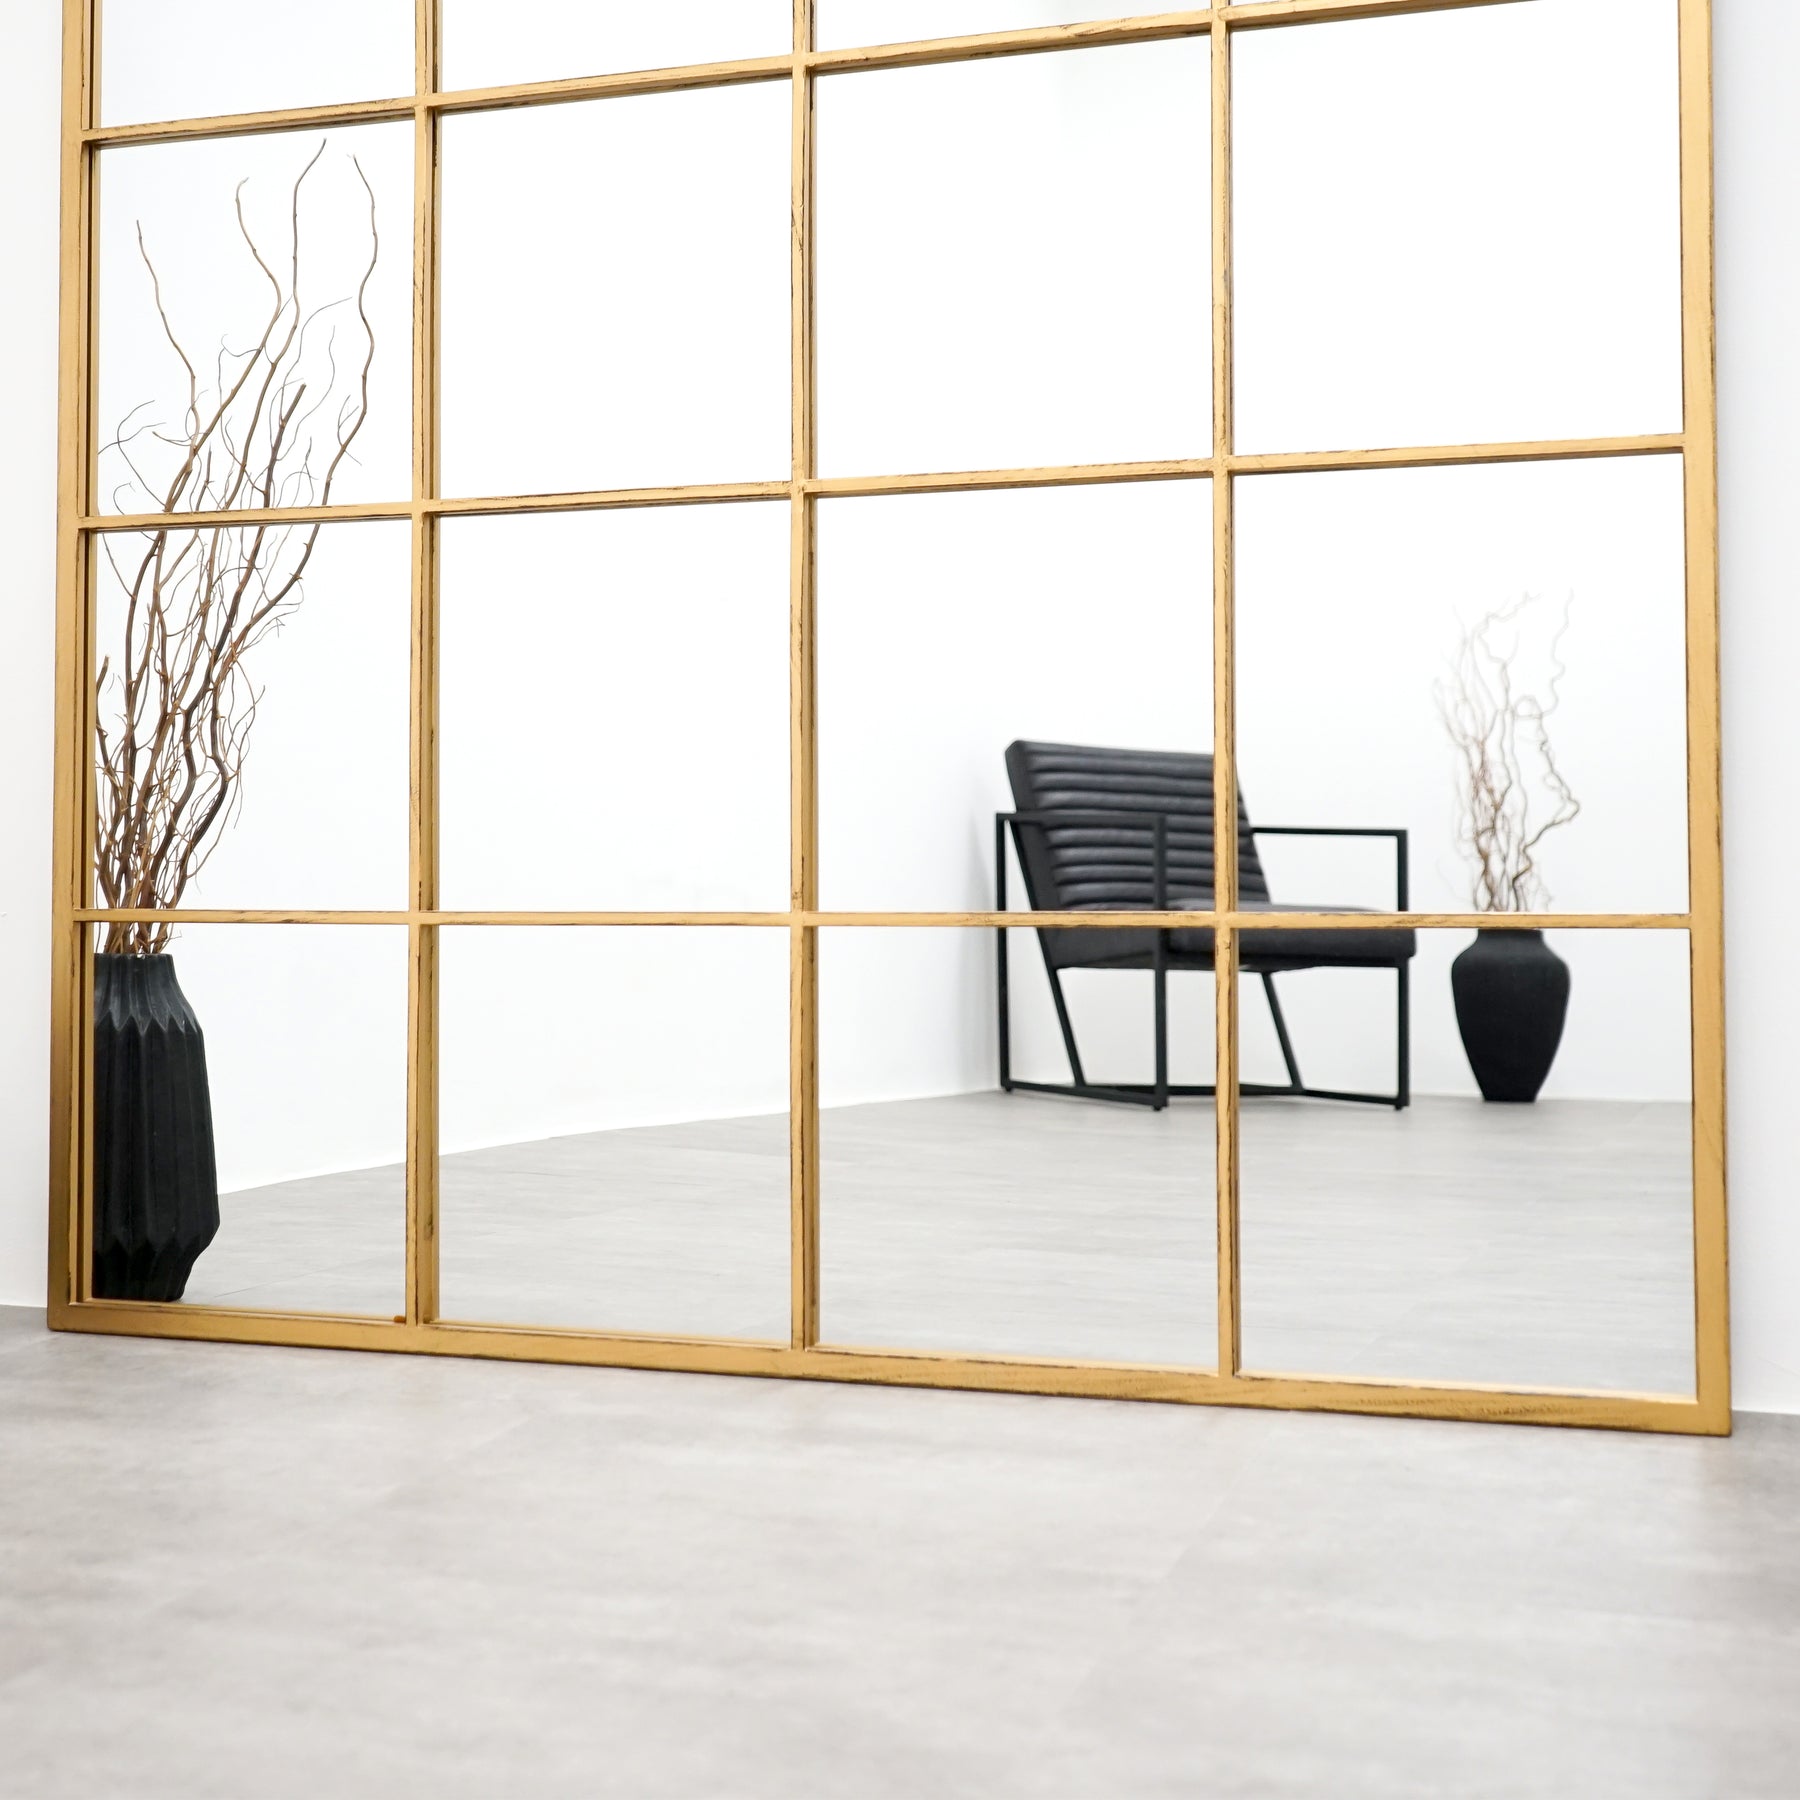 Full length extra large gold industrial metal window mirror with chair in reflection